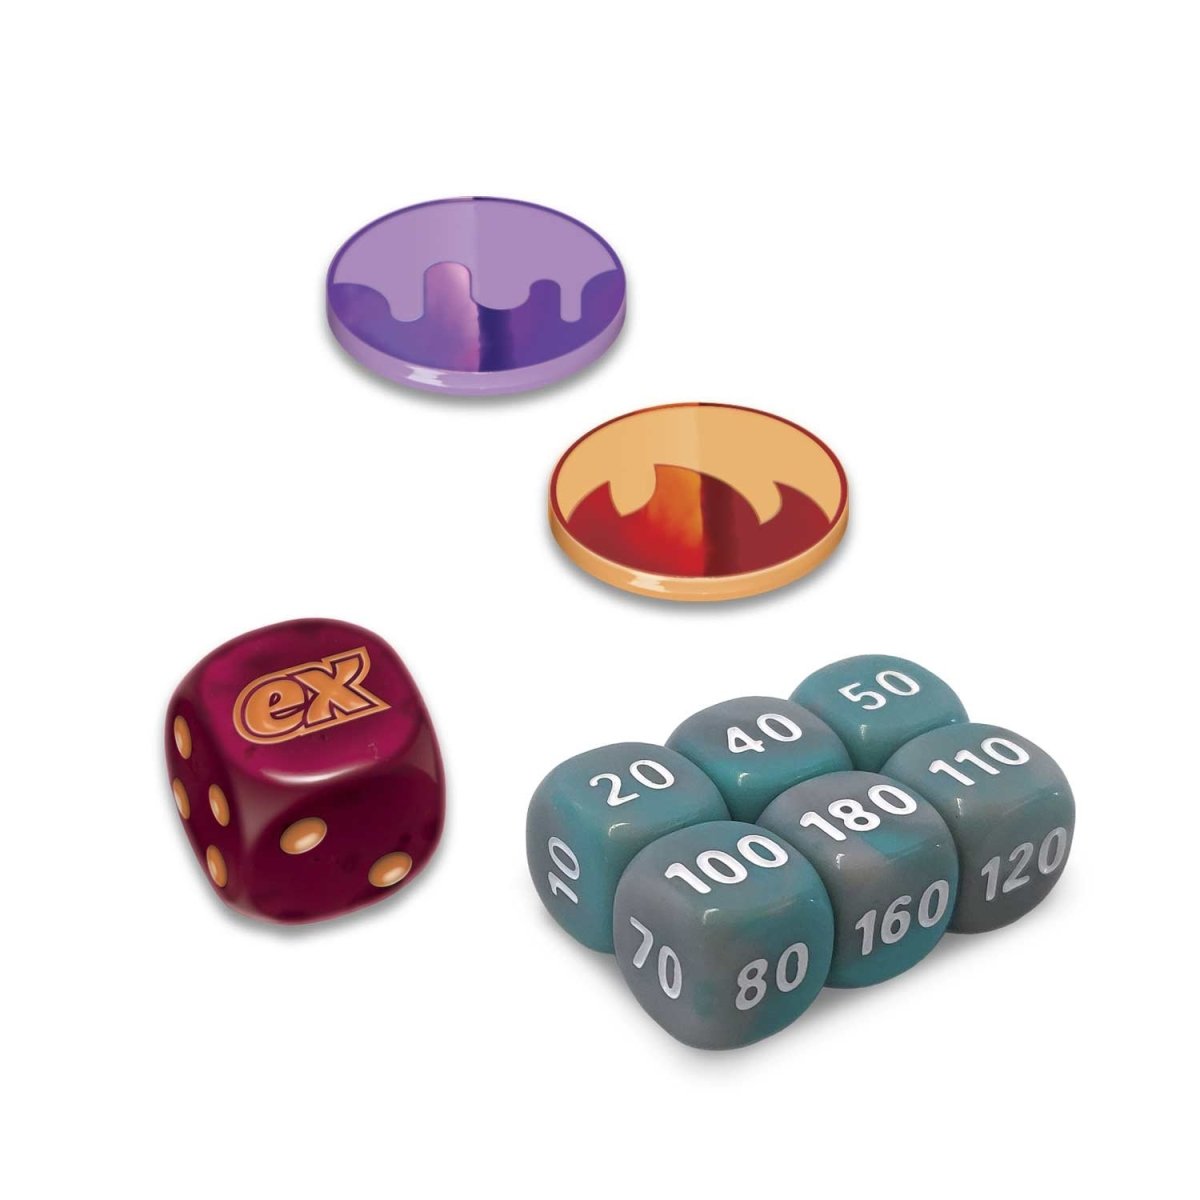 Counters and dice are also included.